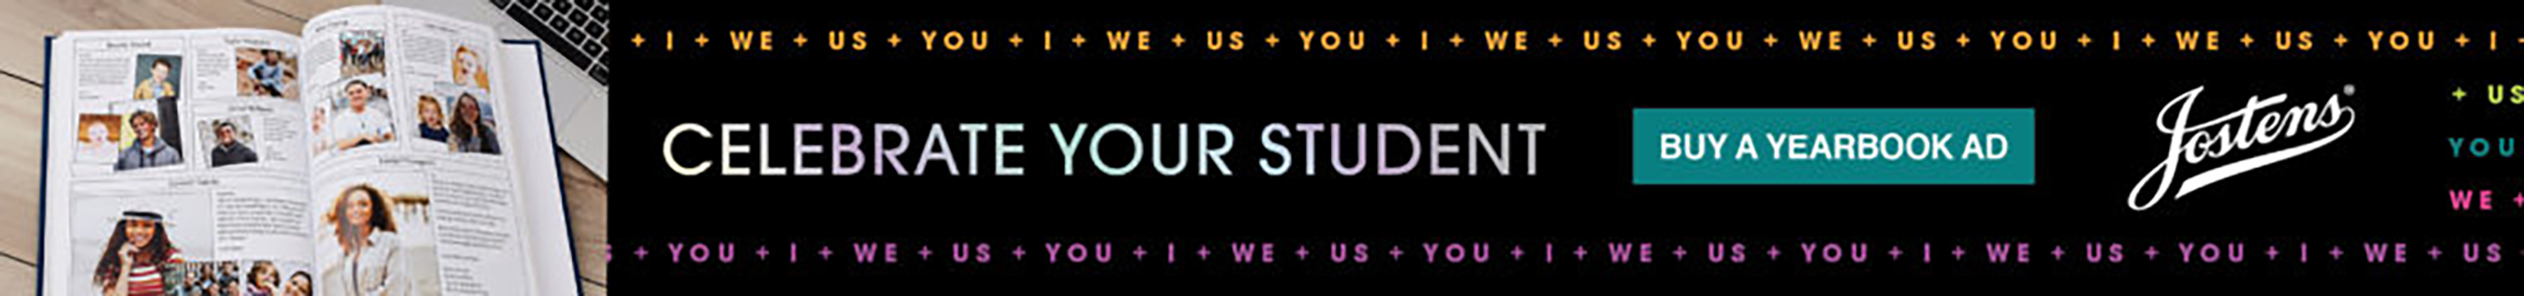 Banner ad - on left is a photograph of an open yearbook. The rest of the ad has the text 'Celebrate Your Student - Buy a Yearbook - Jostens'. The border of the image has the repeating text 'I + We + Us'